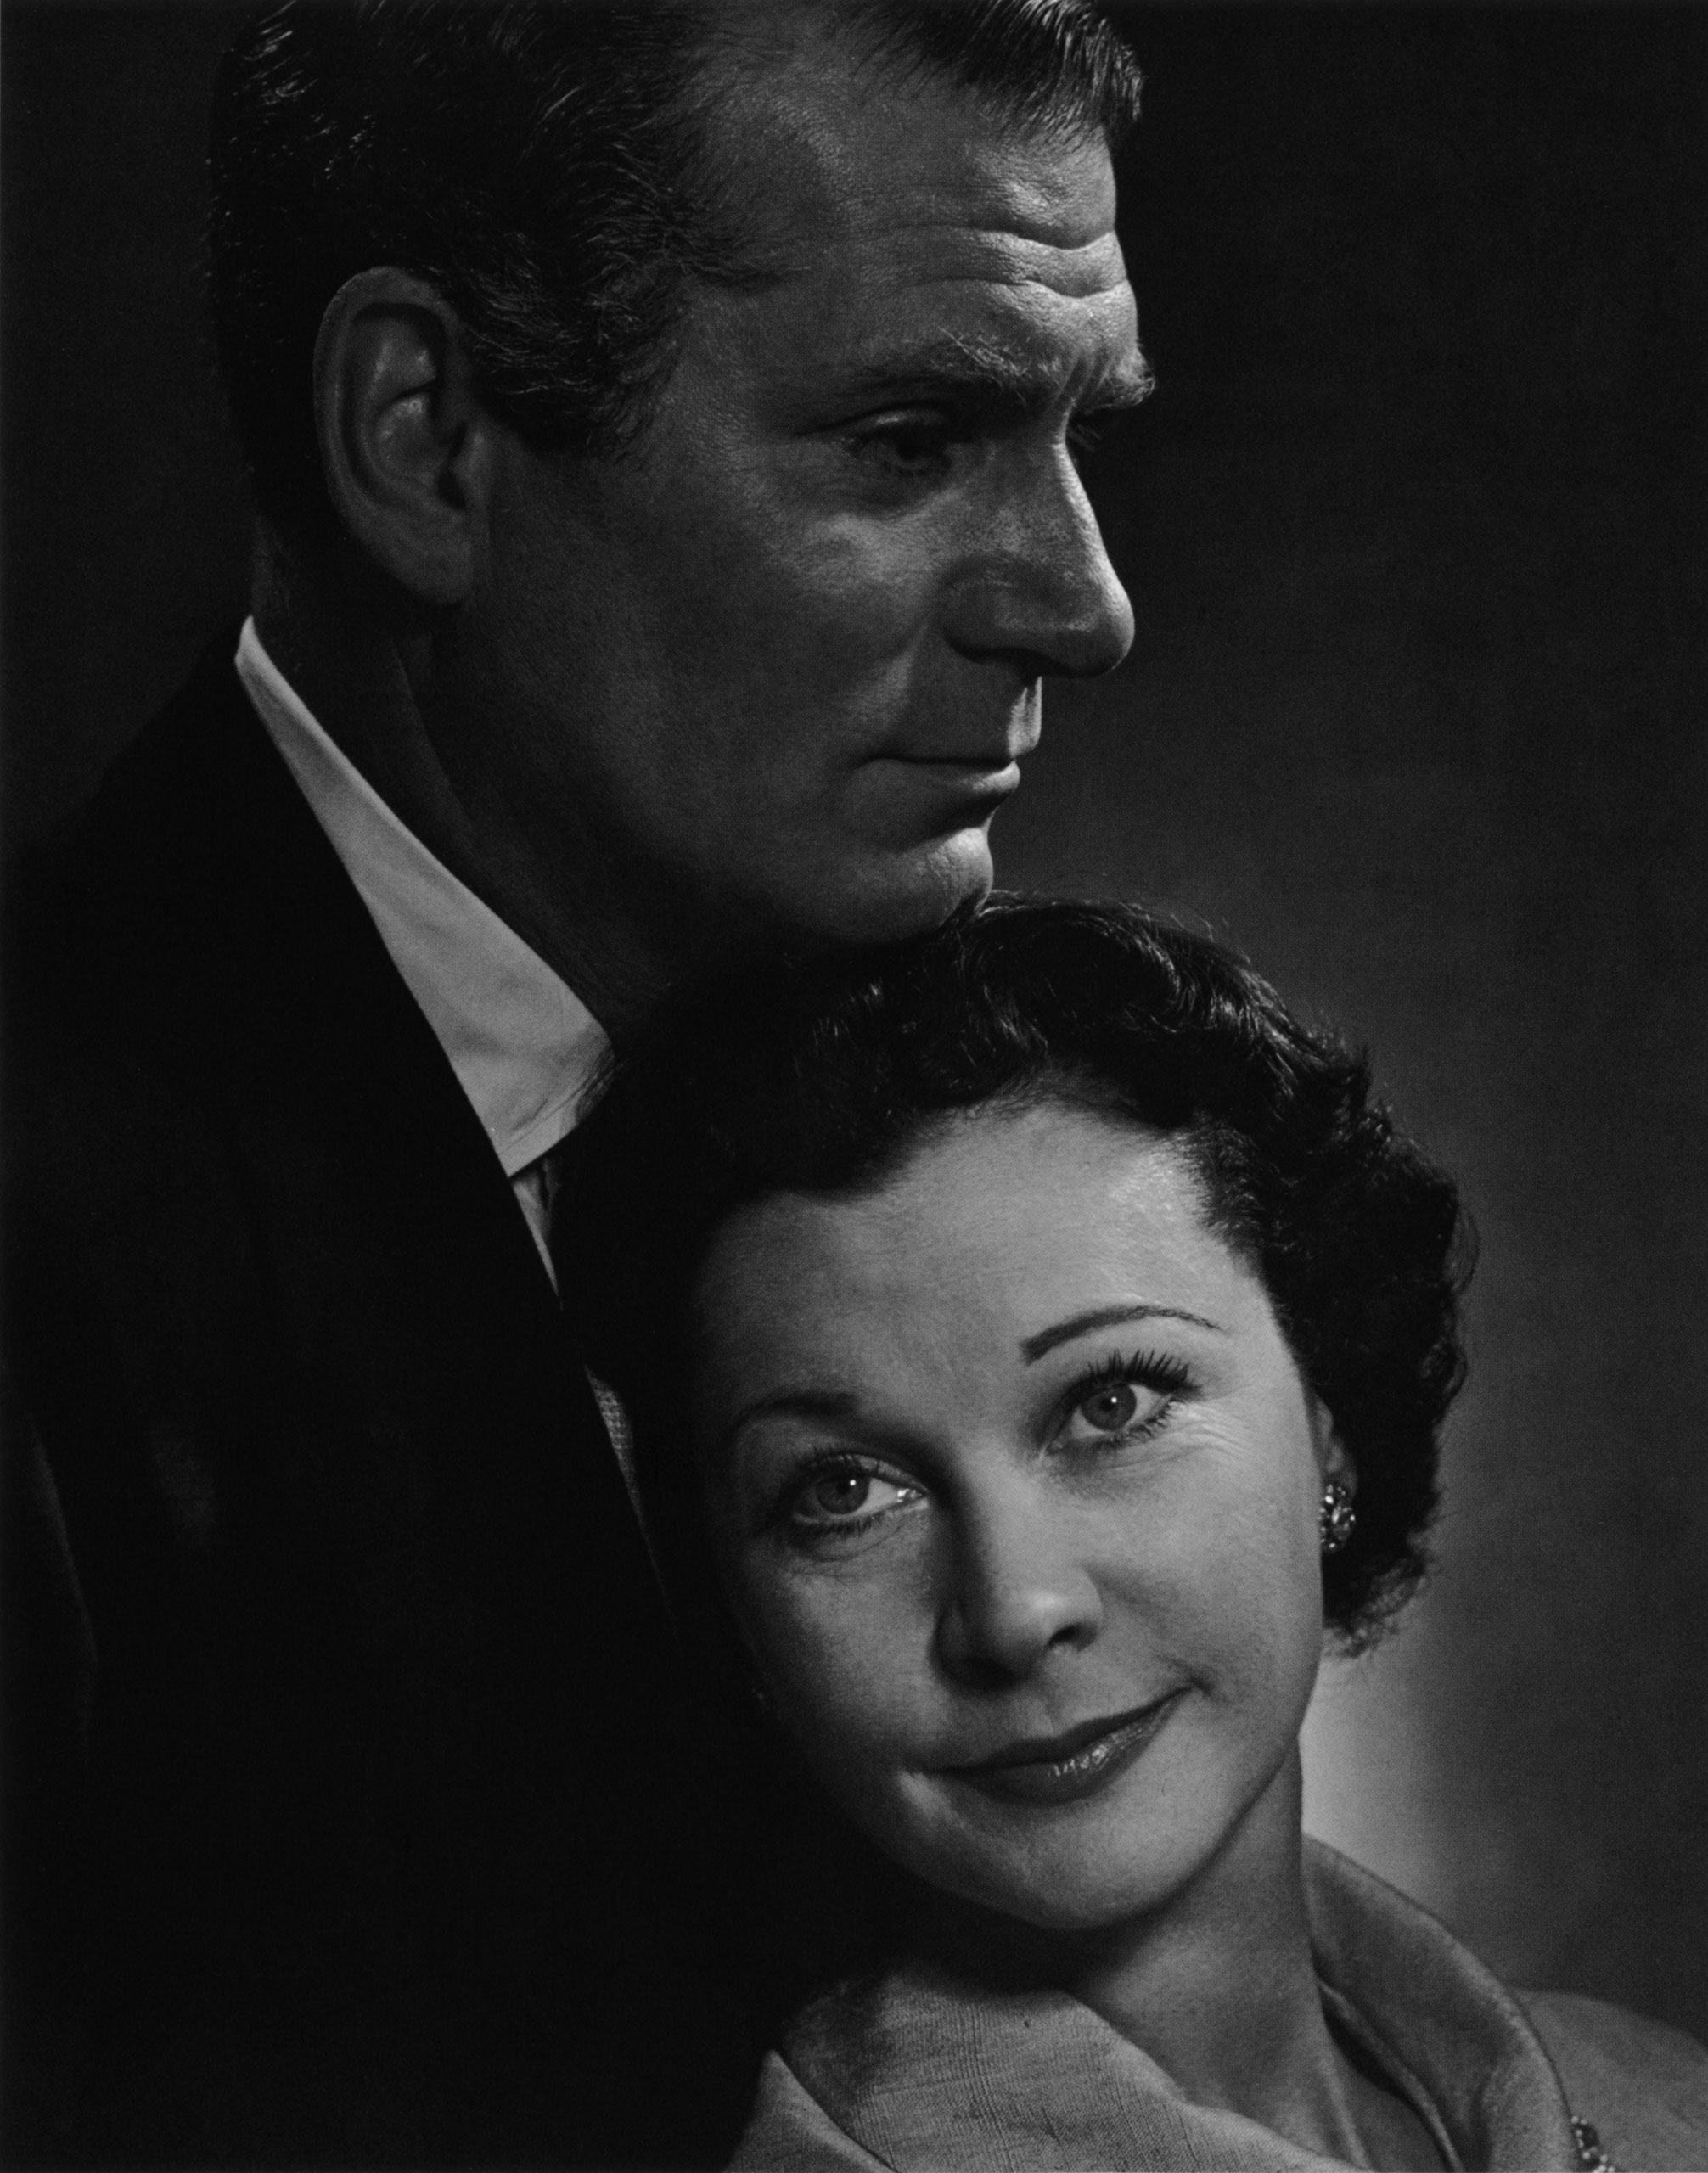 Laurence Olivier and Vivien Leigh, 1954 © Yousuf Karsh